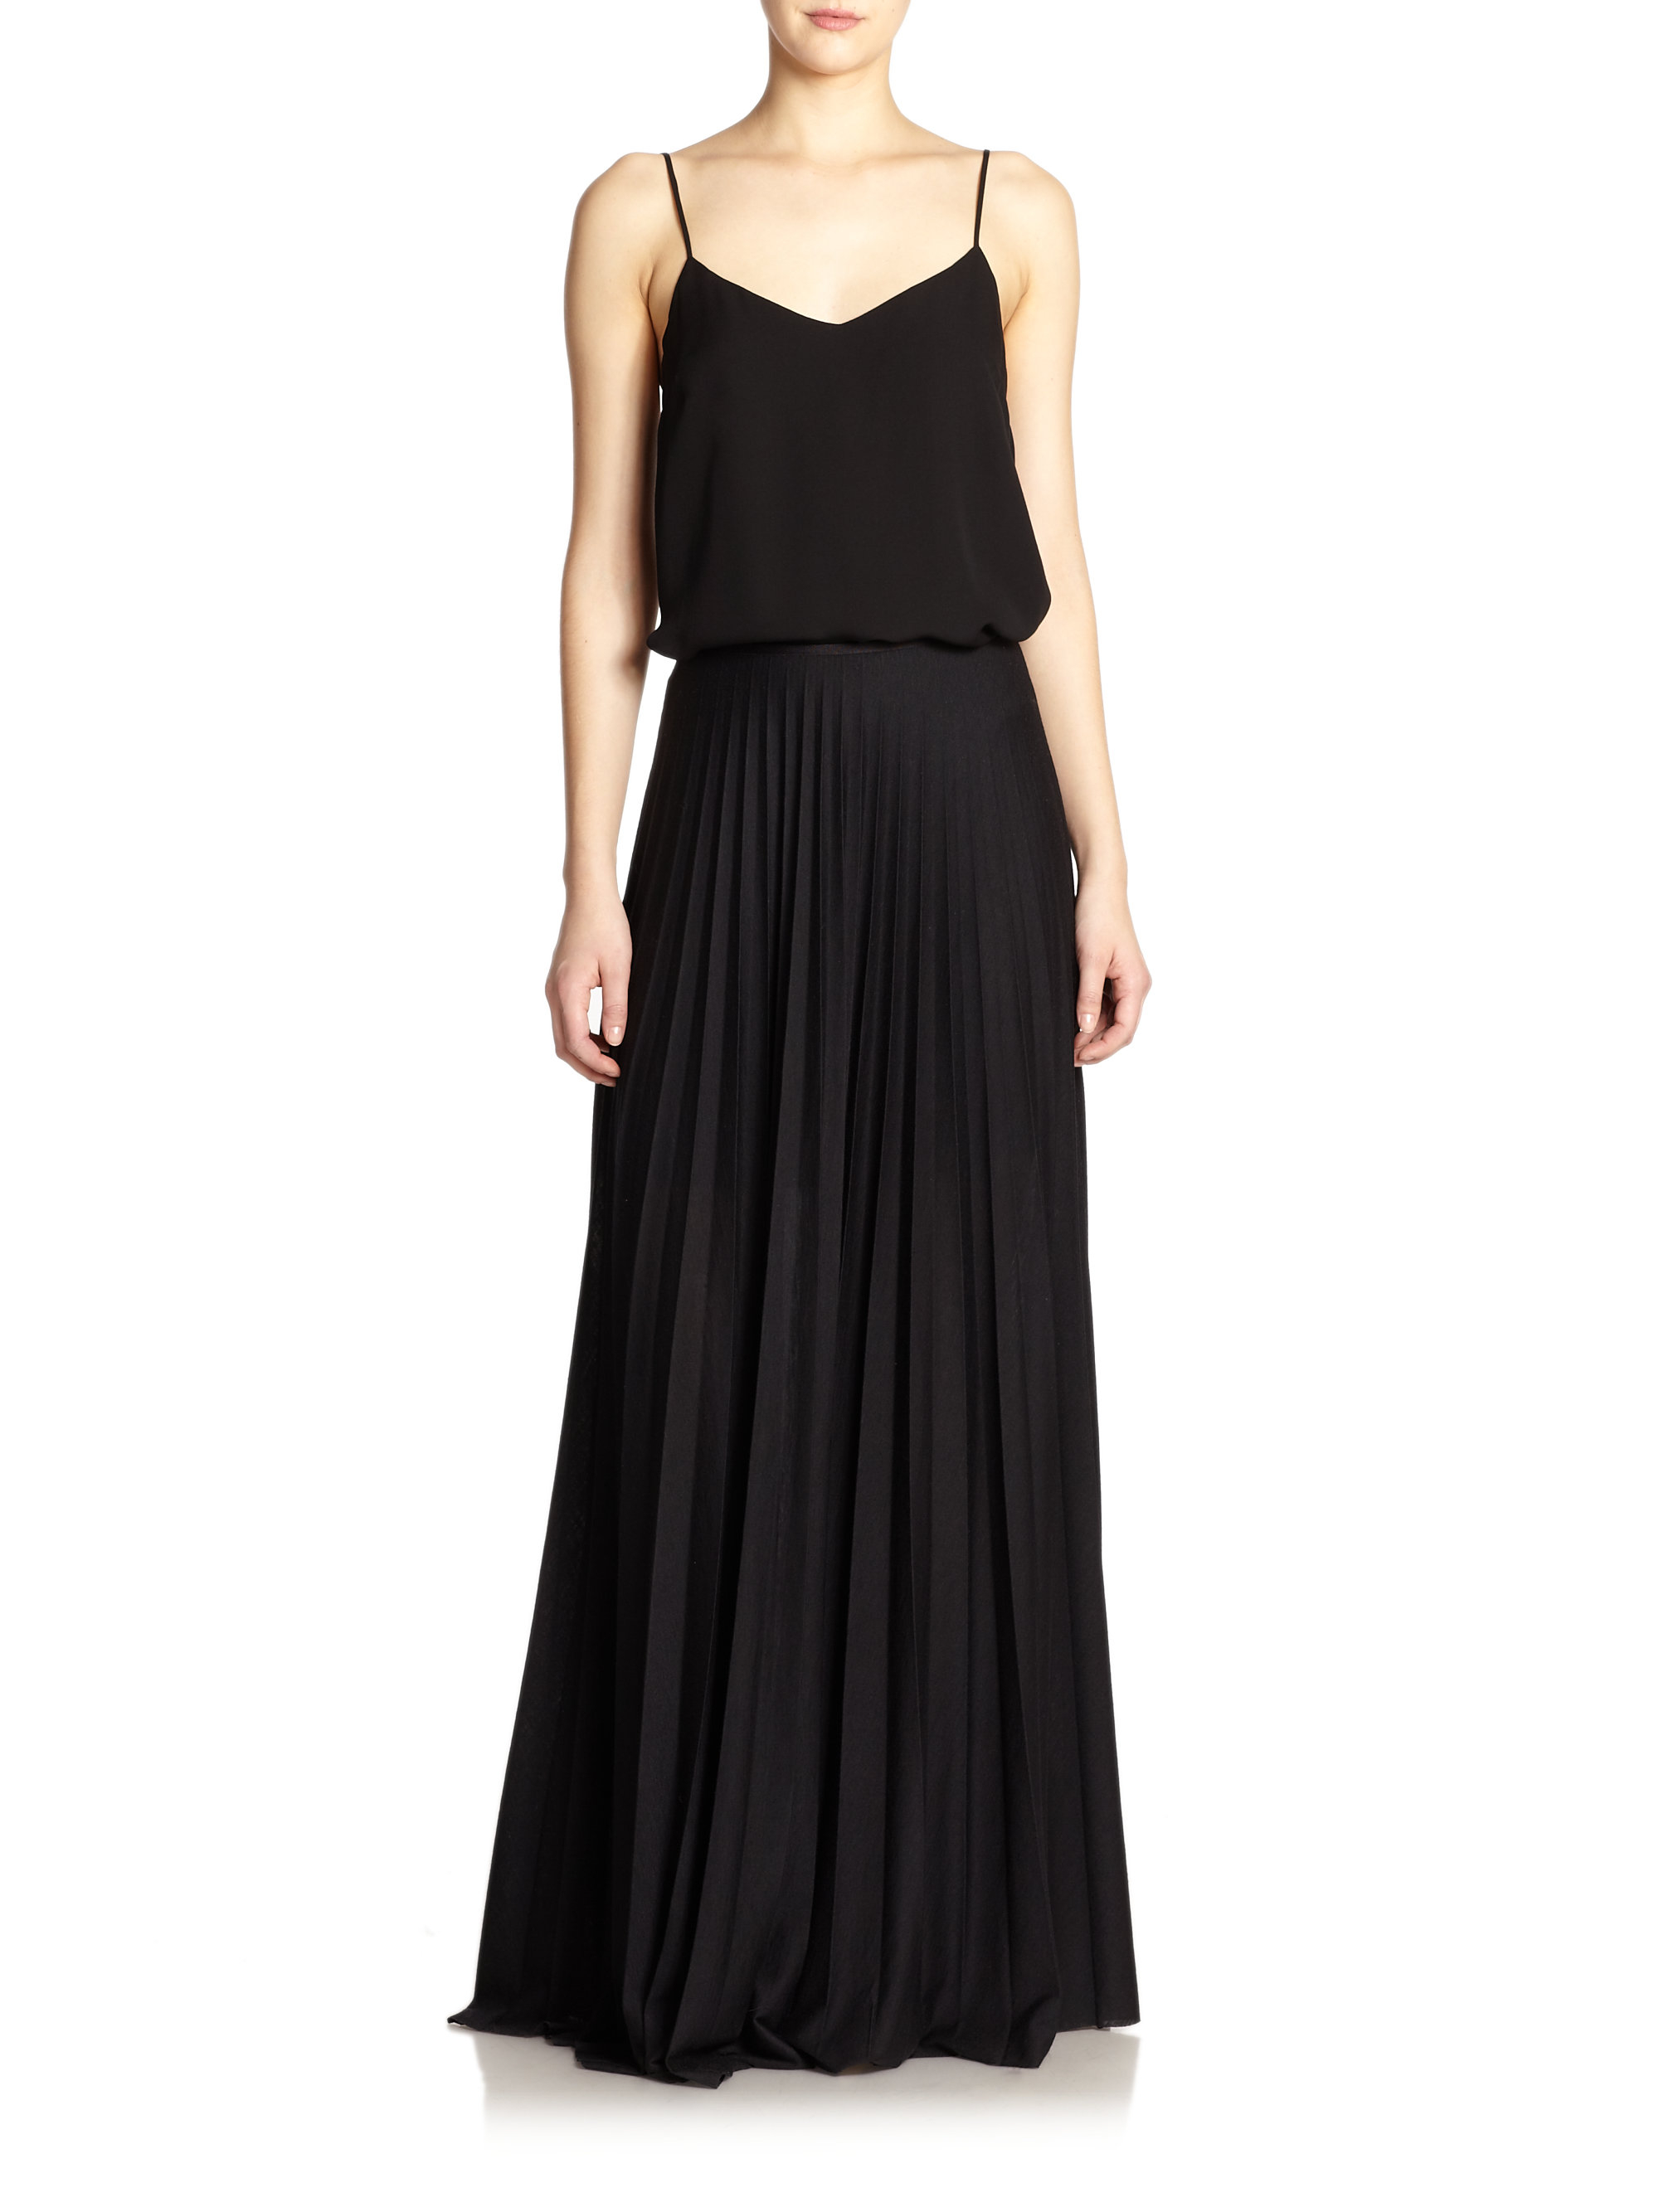 Lyst - Theory Miklo Pleated Maxi Skirt in Black